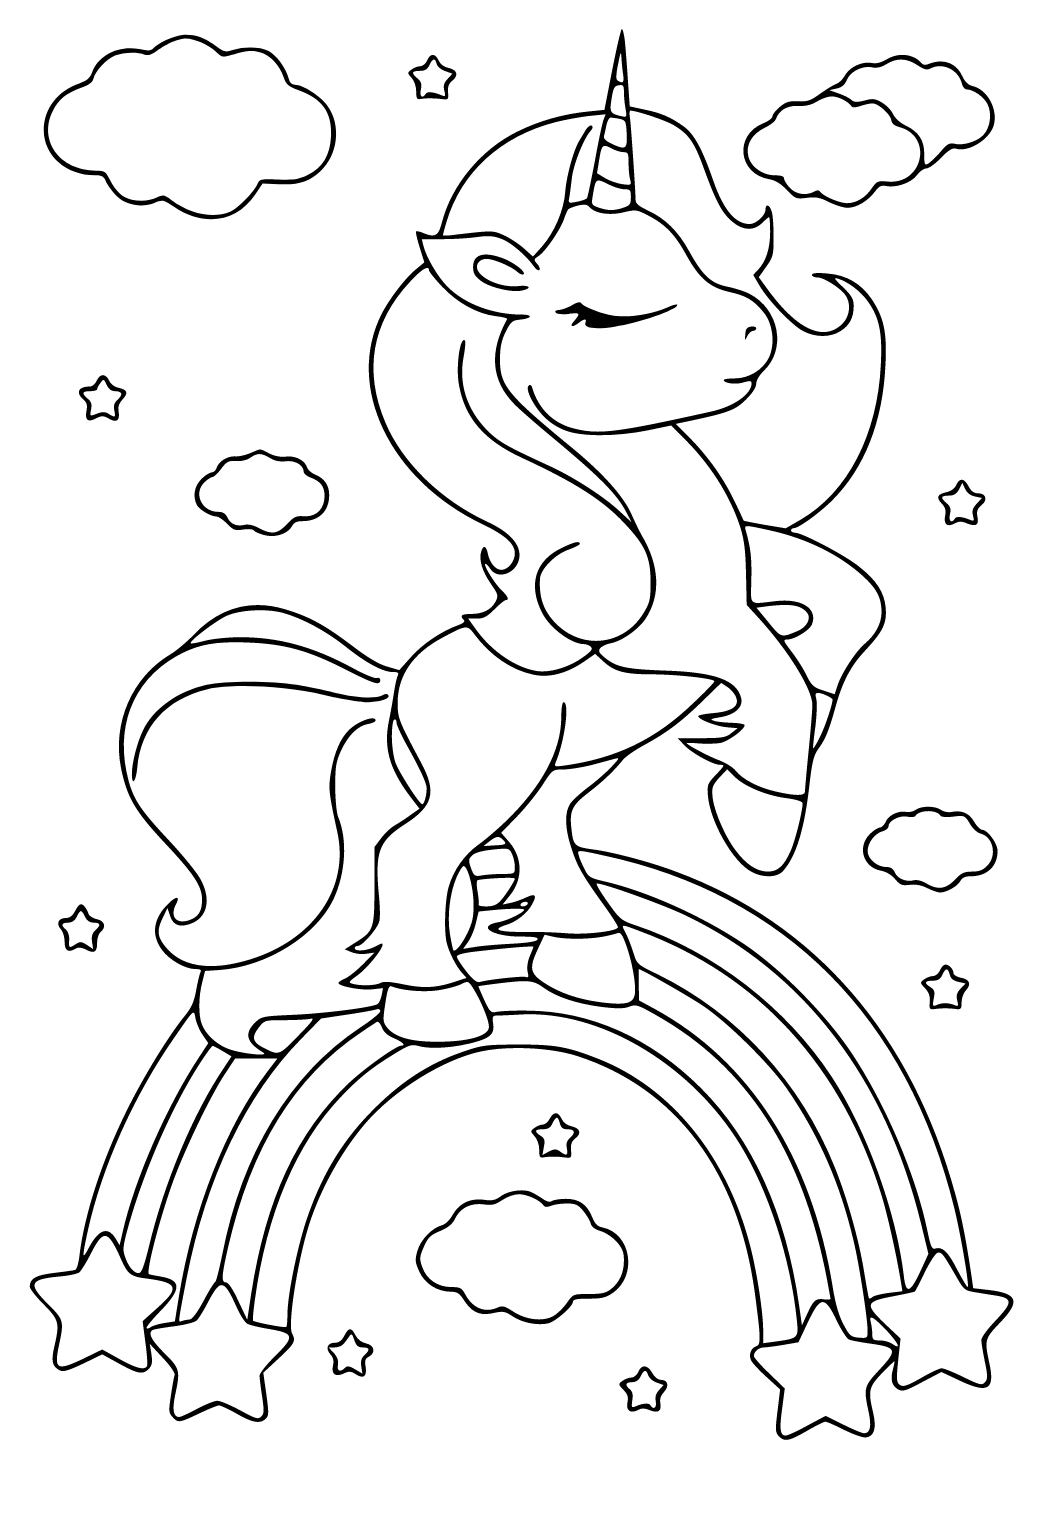 Free Printable Unicorn Overlord Coloring Page for Adults and Kids ...